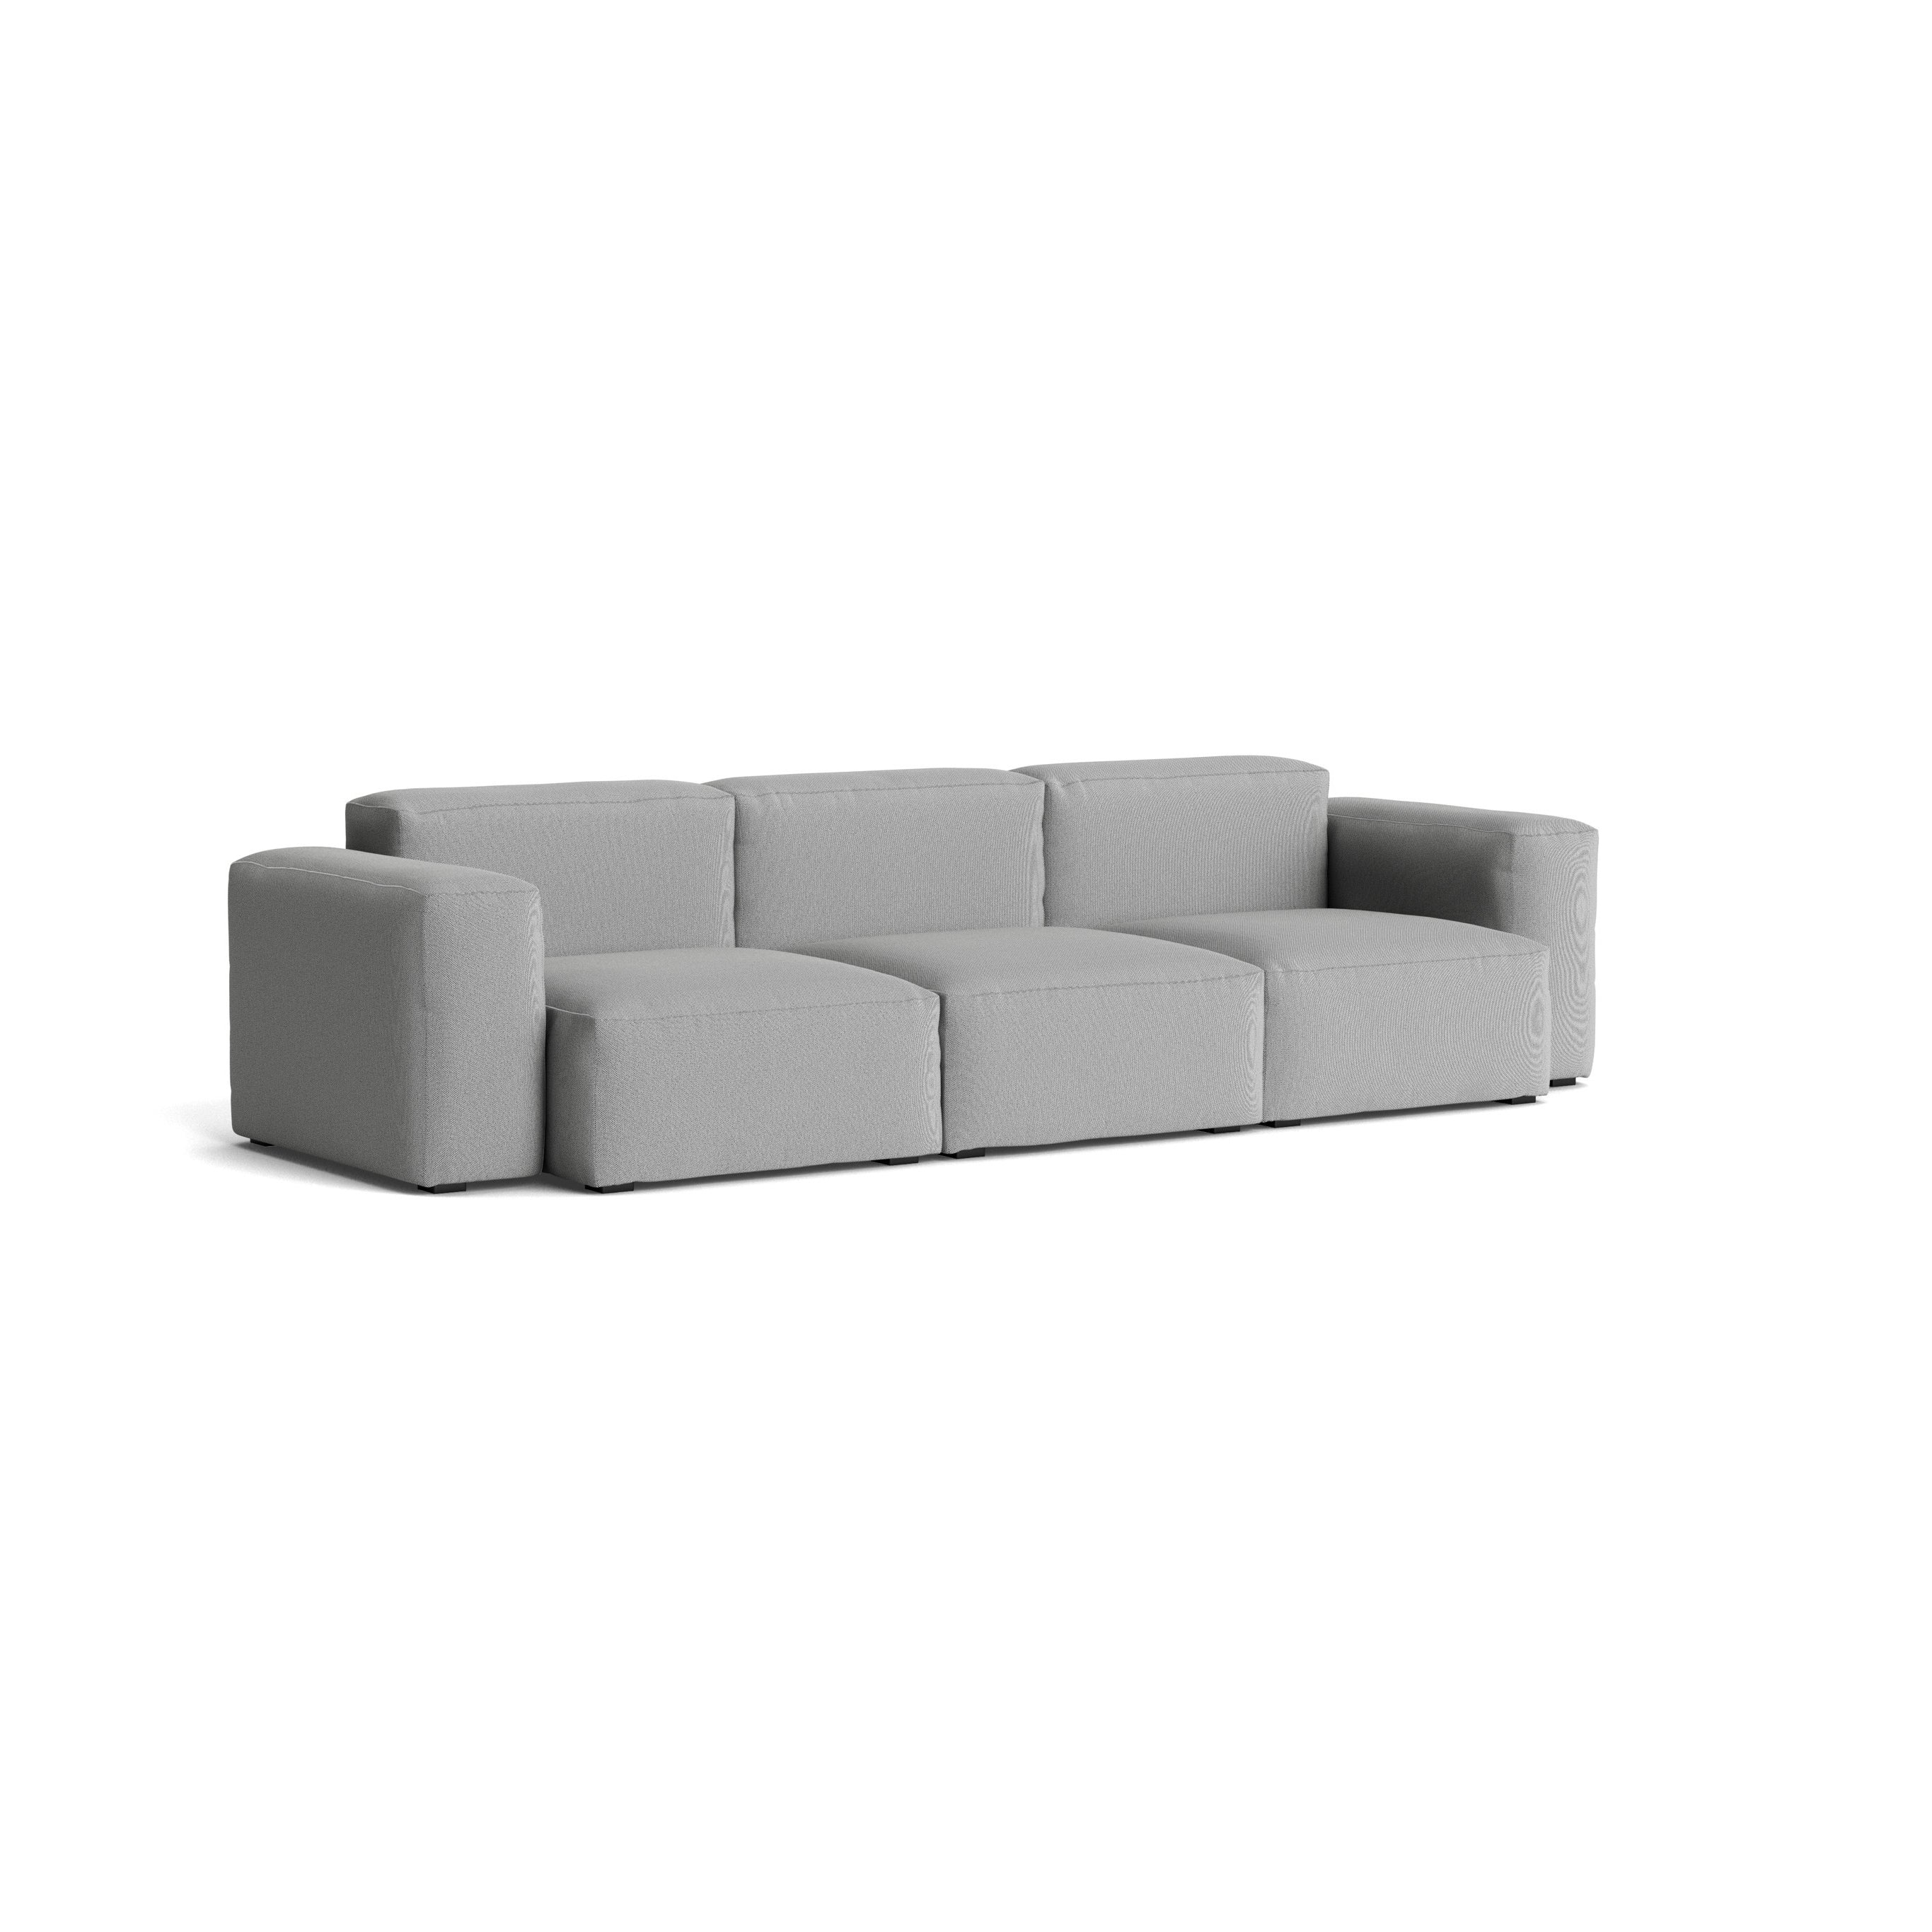 HAY Mags Soft Low Armrest Sofa 3 Seater - Combination 1